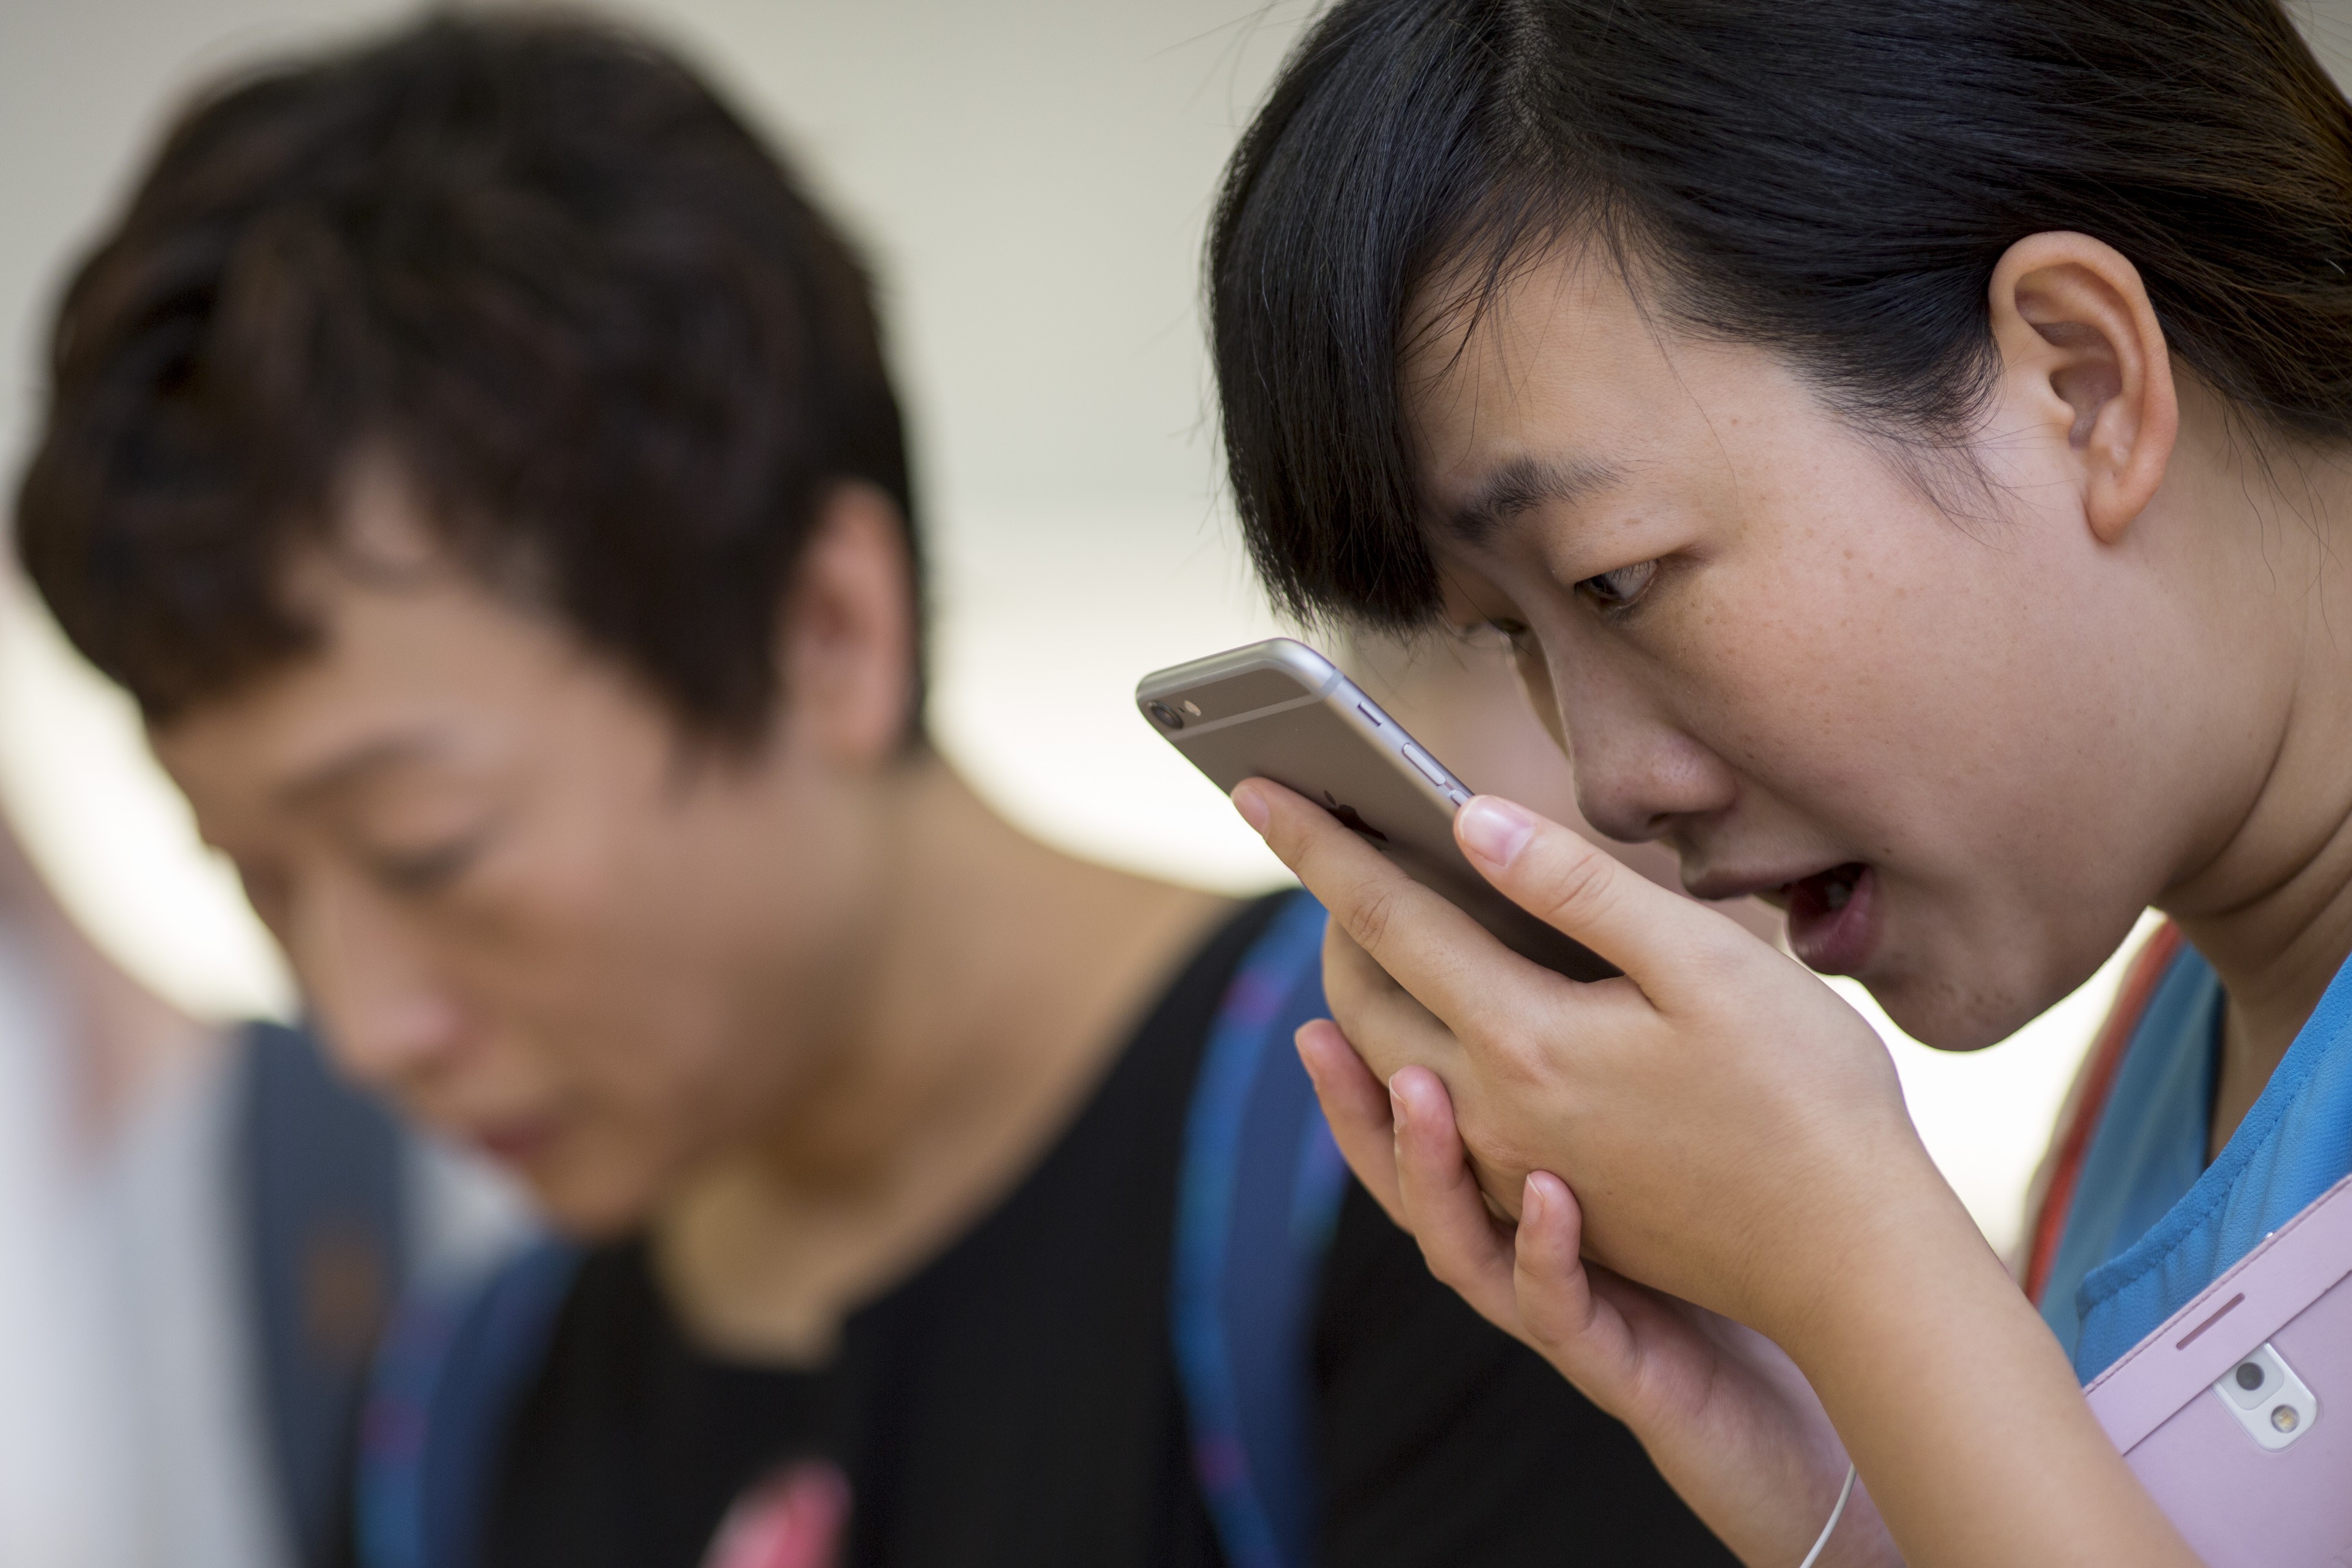 A customer tries the voice recognition function on an Apple iPhone in Causeway Bay. As technology advances, the features that offer consumers’ convenience may also make them vulnerable. Photo: Bloomberg